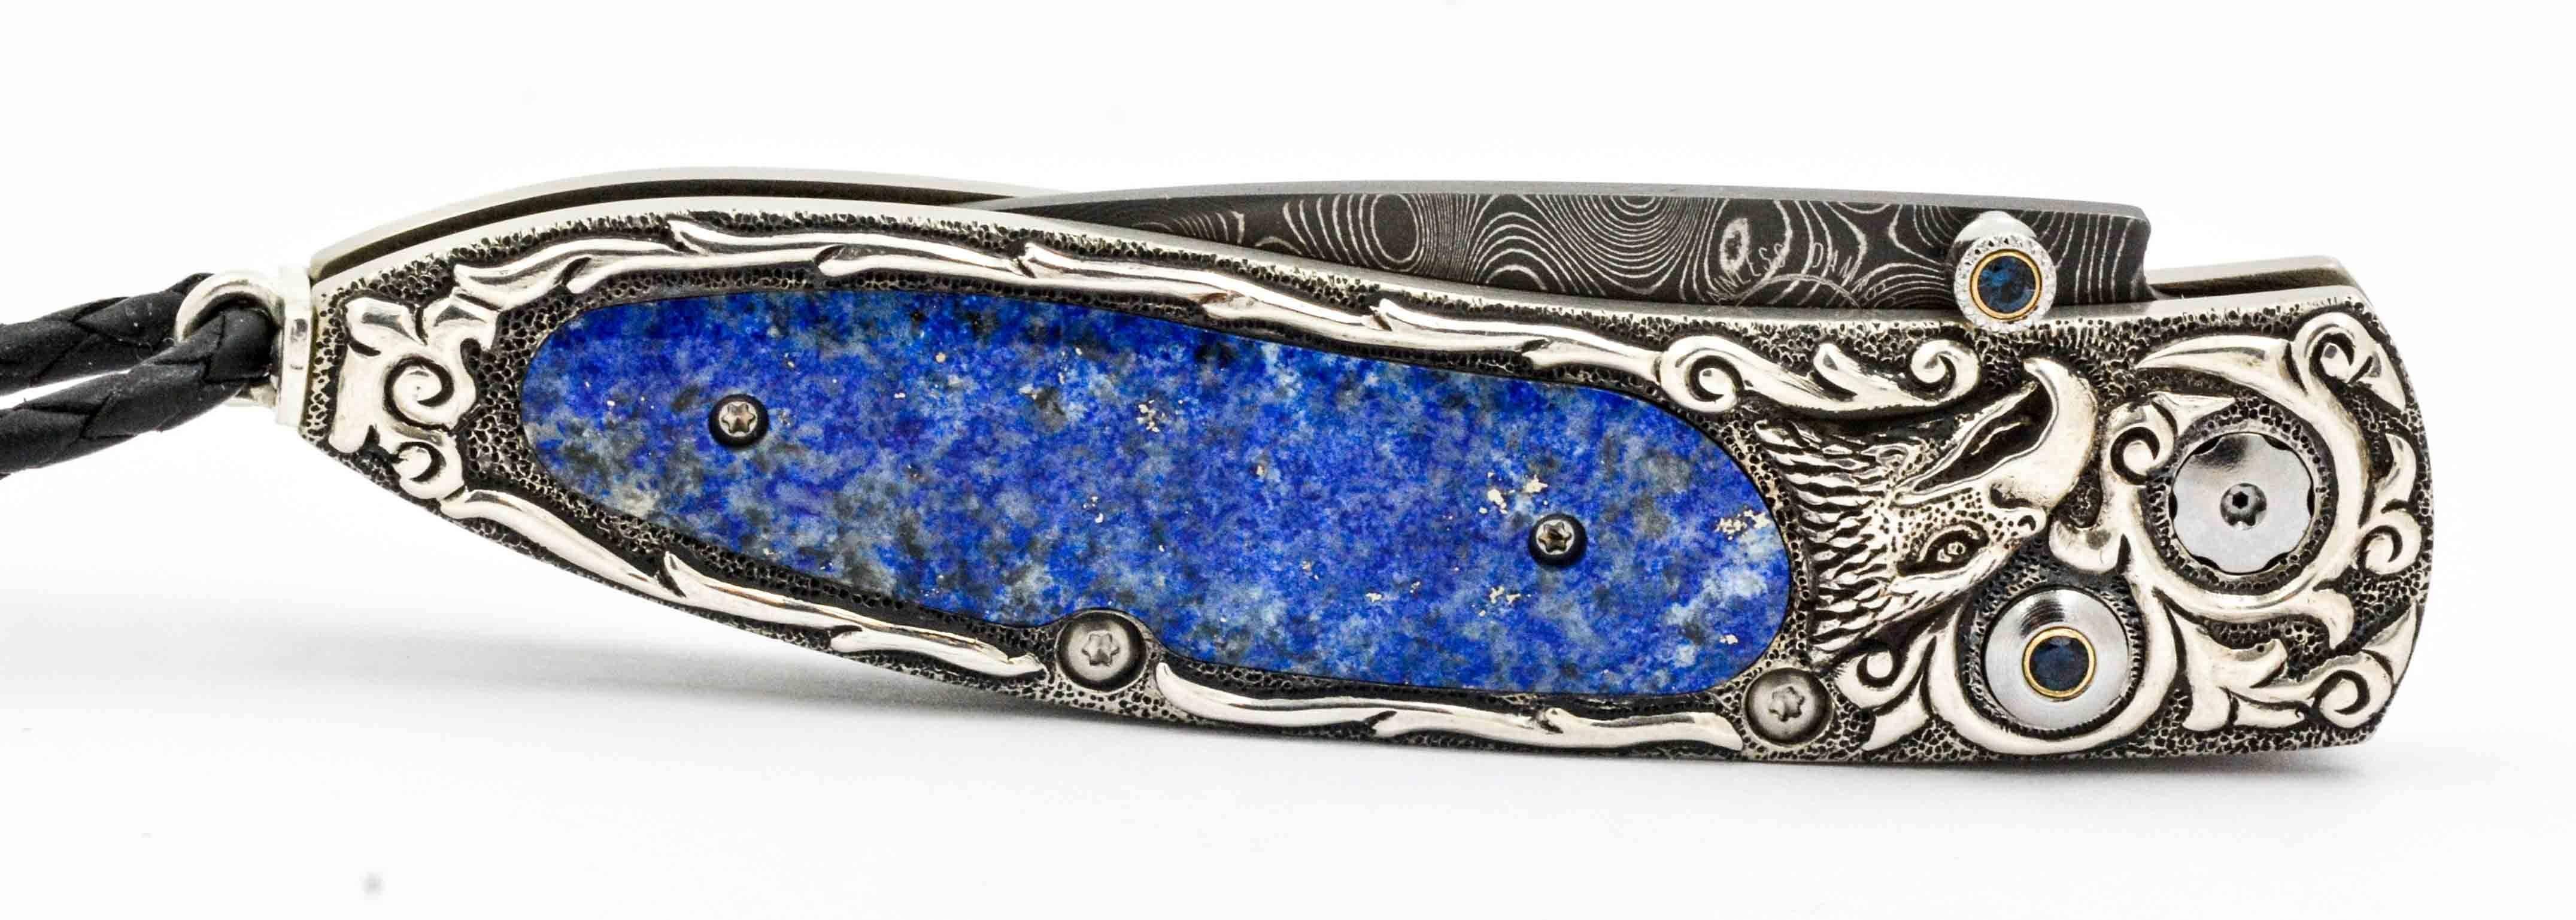 William Henry Designed this amazing Damascus steel knife to feature a leopard skin patterned Monarch shaped blade.  The blade is fixed into an amazing handle that features an artistically carved handle that is embellished with the image of an eagle